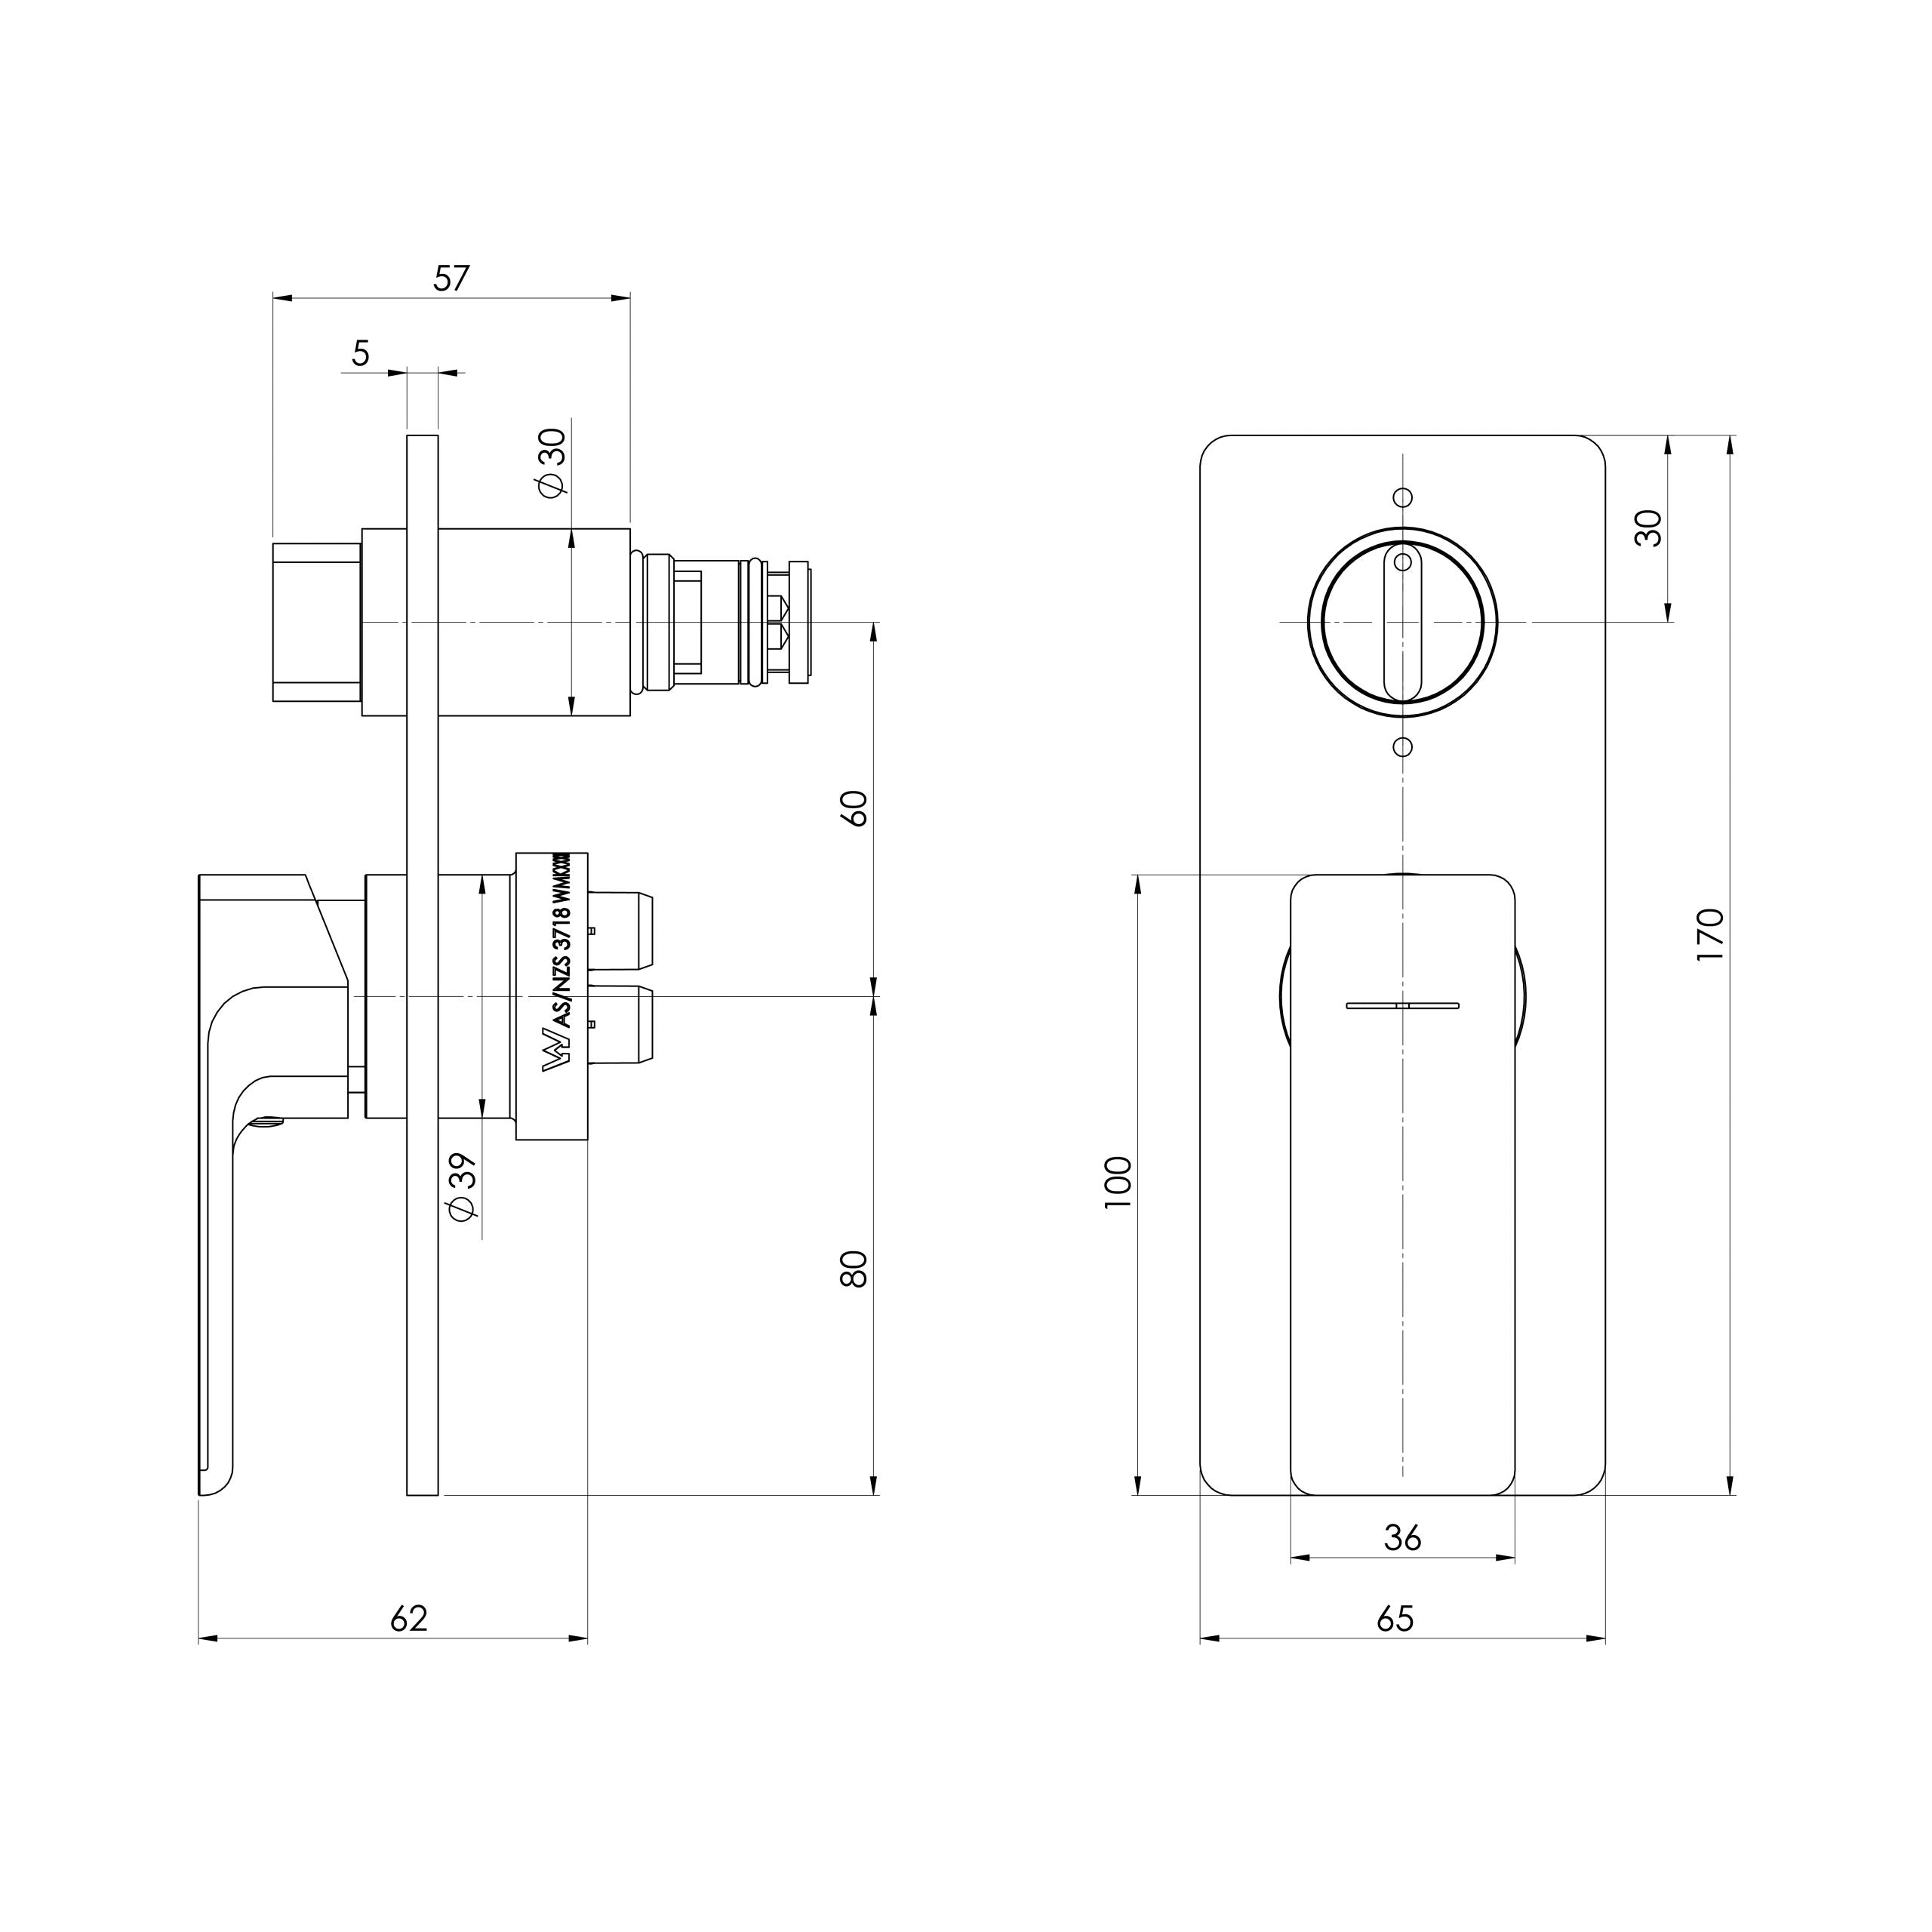 PHOENIX GLOSS MKII SWITCHMIX SHOWER / BATH DIVERTER MIXER FIT-OFF AND ROUGH-IN KIT BRUSHED NICKEL